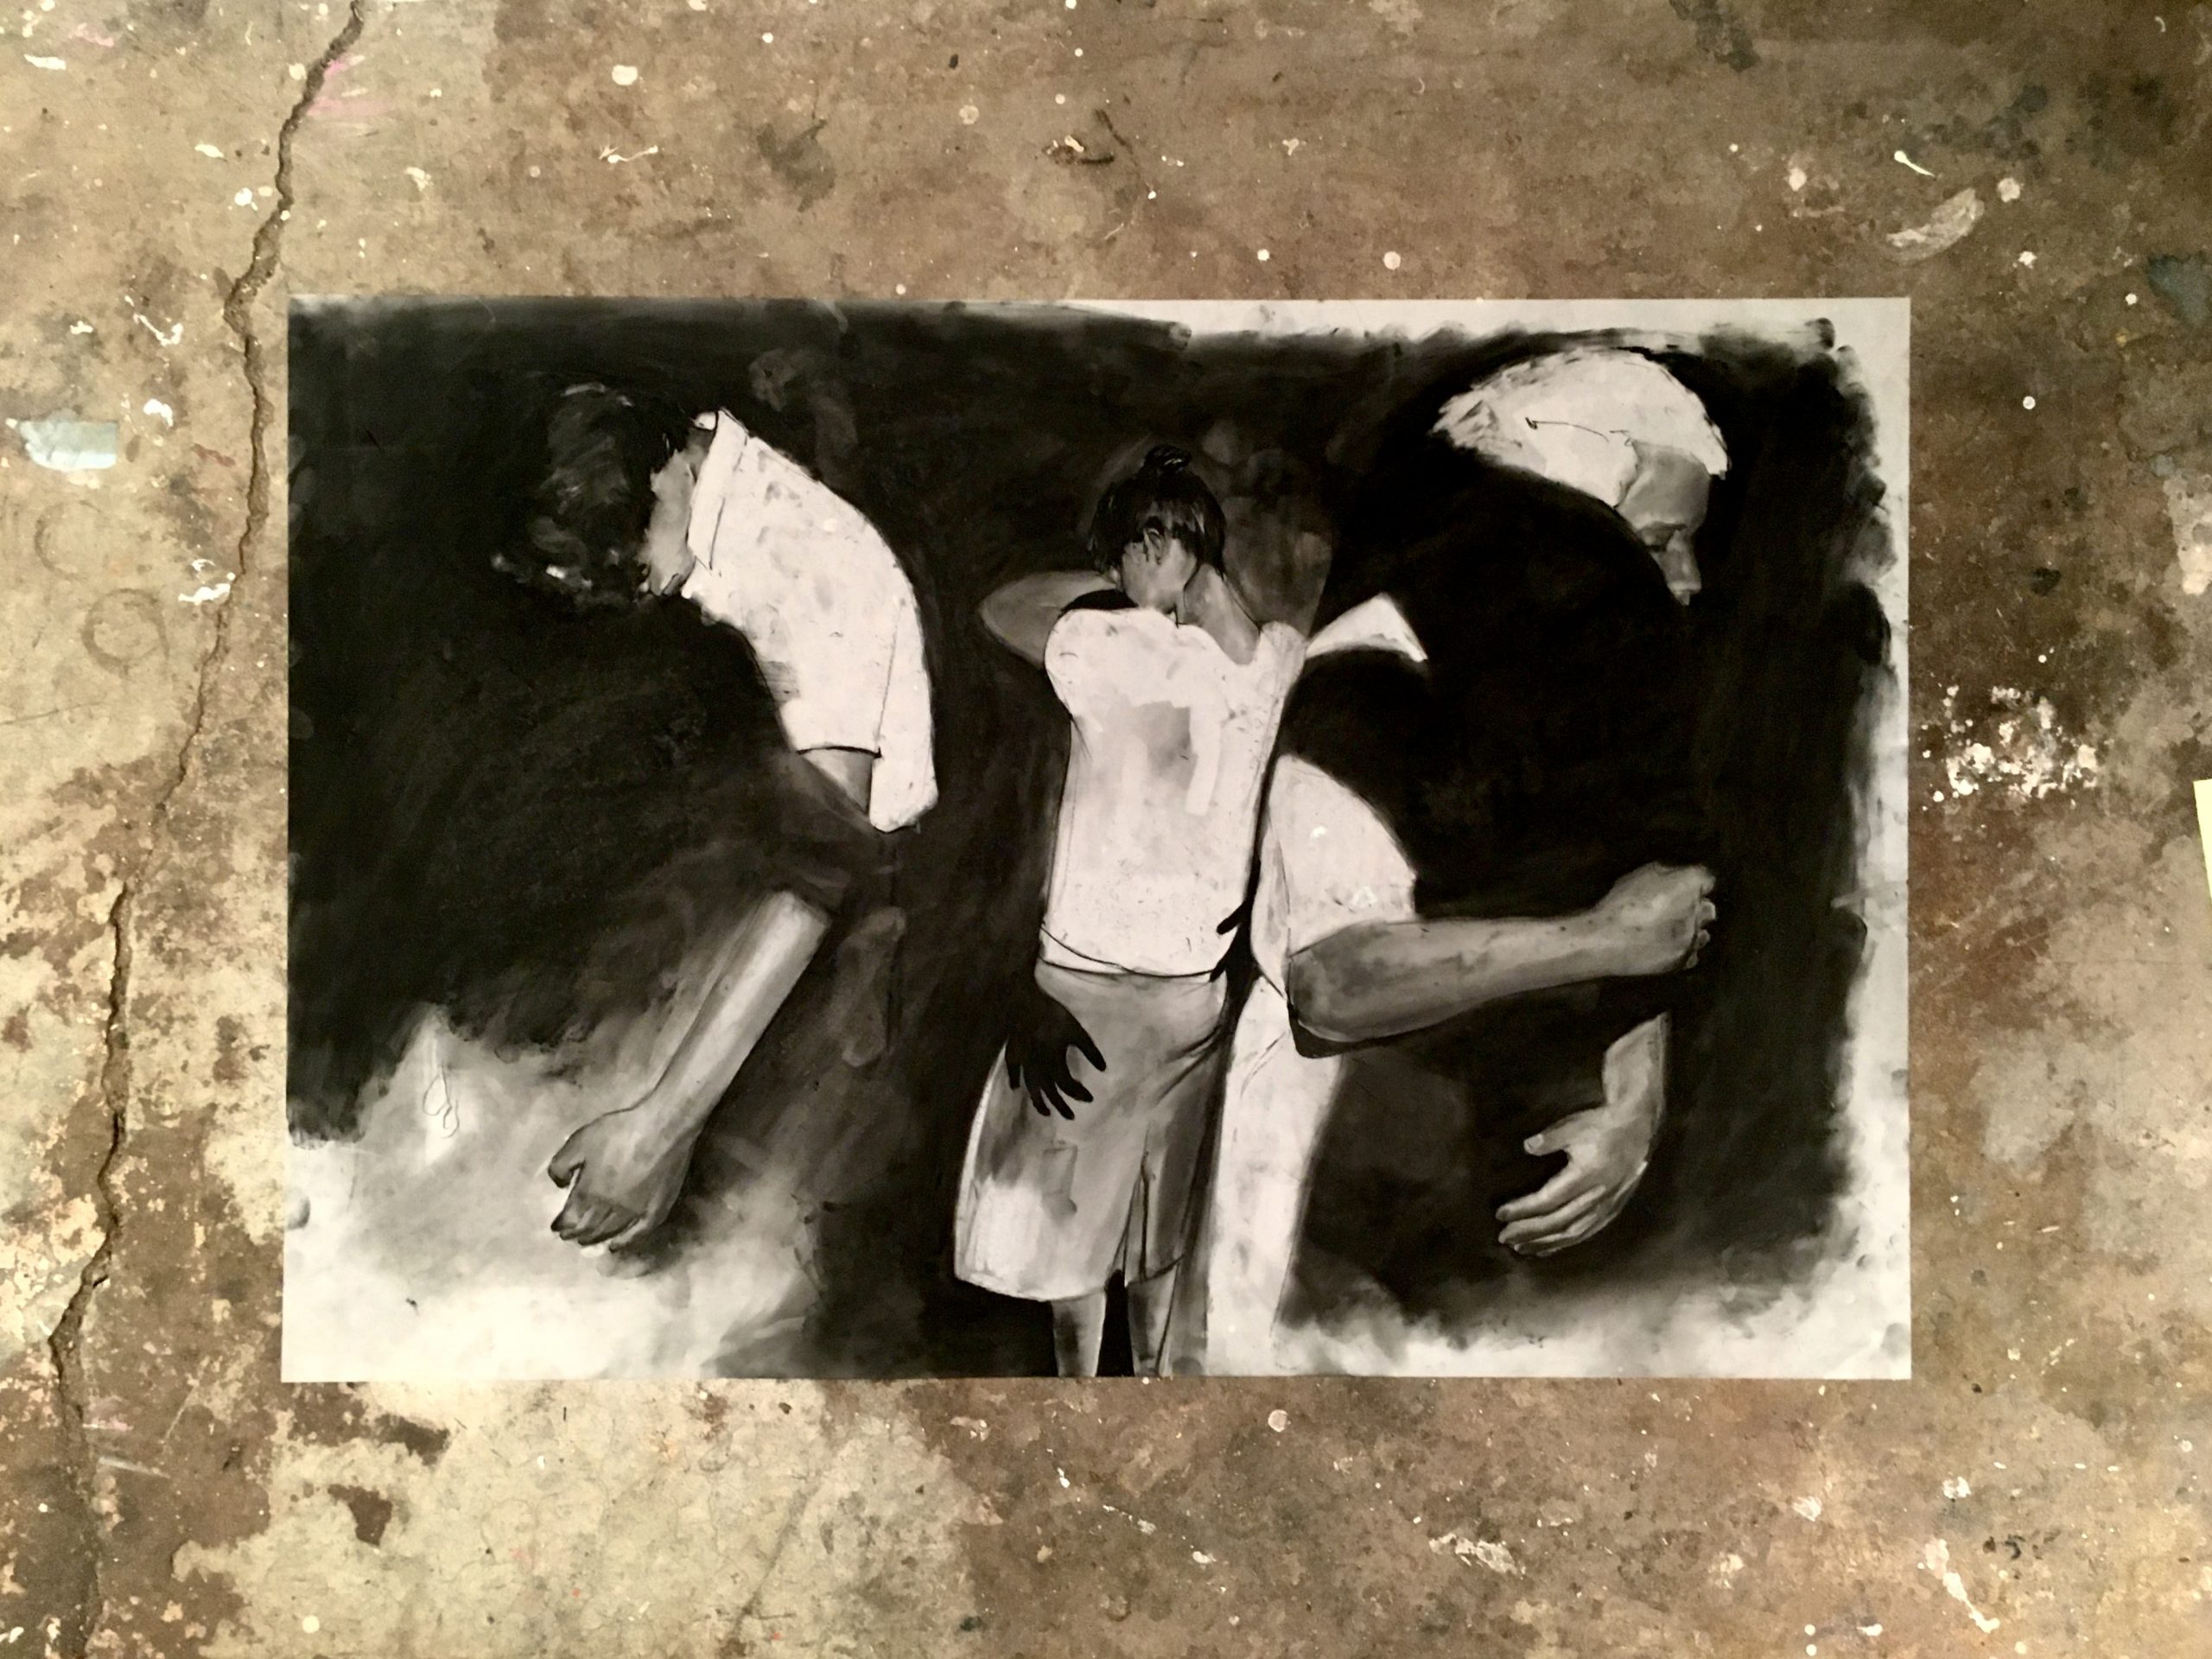 Large-scale charcoal drawing created by visual artist Alissa Zilber of people dancing with shadows.